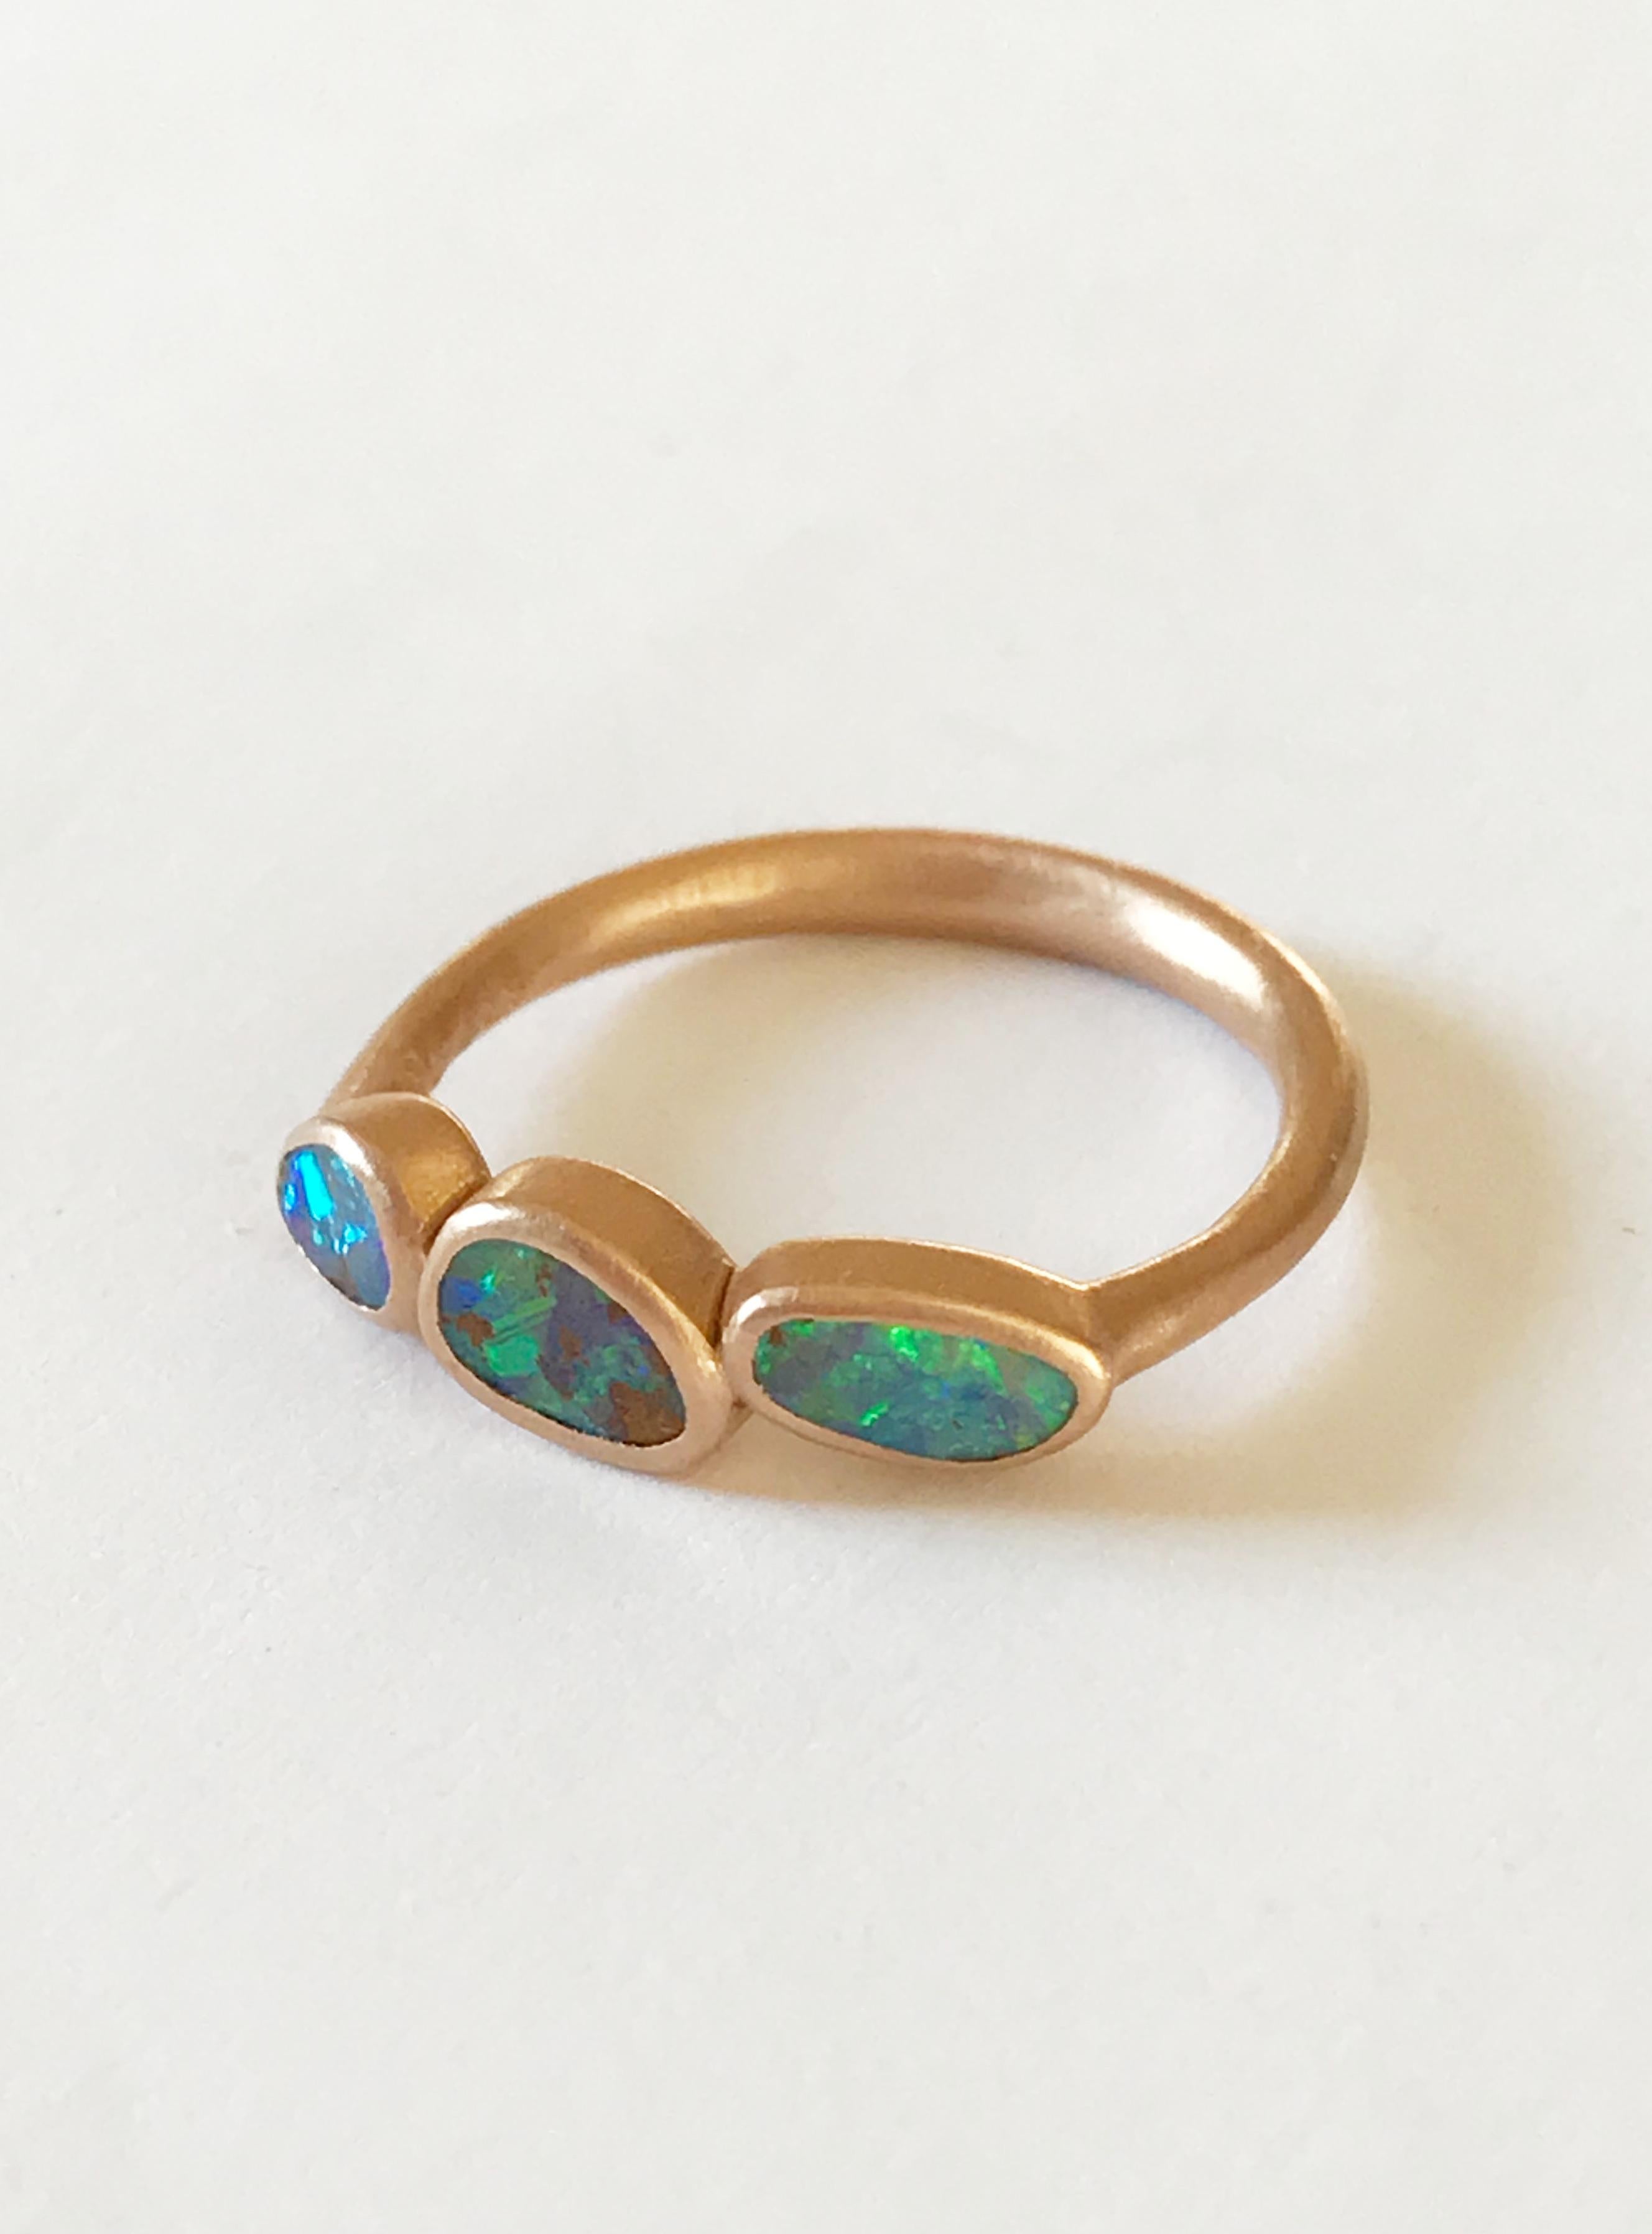 Dalben design One of a kind 18 kt rose gold ring with three bezel-set blue-violet-green Australian Boulder Opals weight 1,19 carats  .  
Ring size  US 7 1/4  - EU 55 re-sizable .  
Bezels setting dimension:  
max width 18,9 mm,  
max height 5,7 mm.